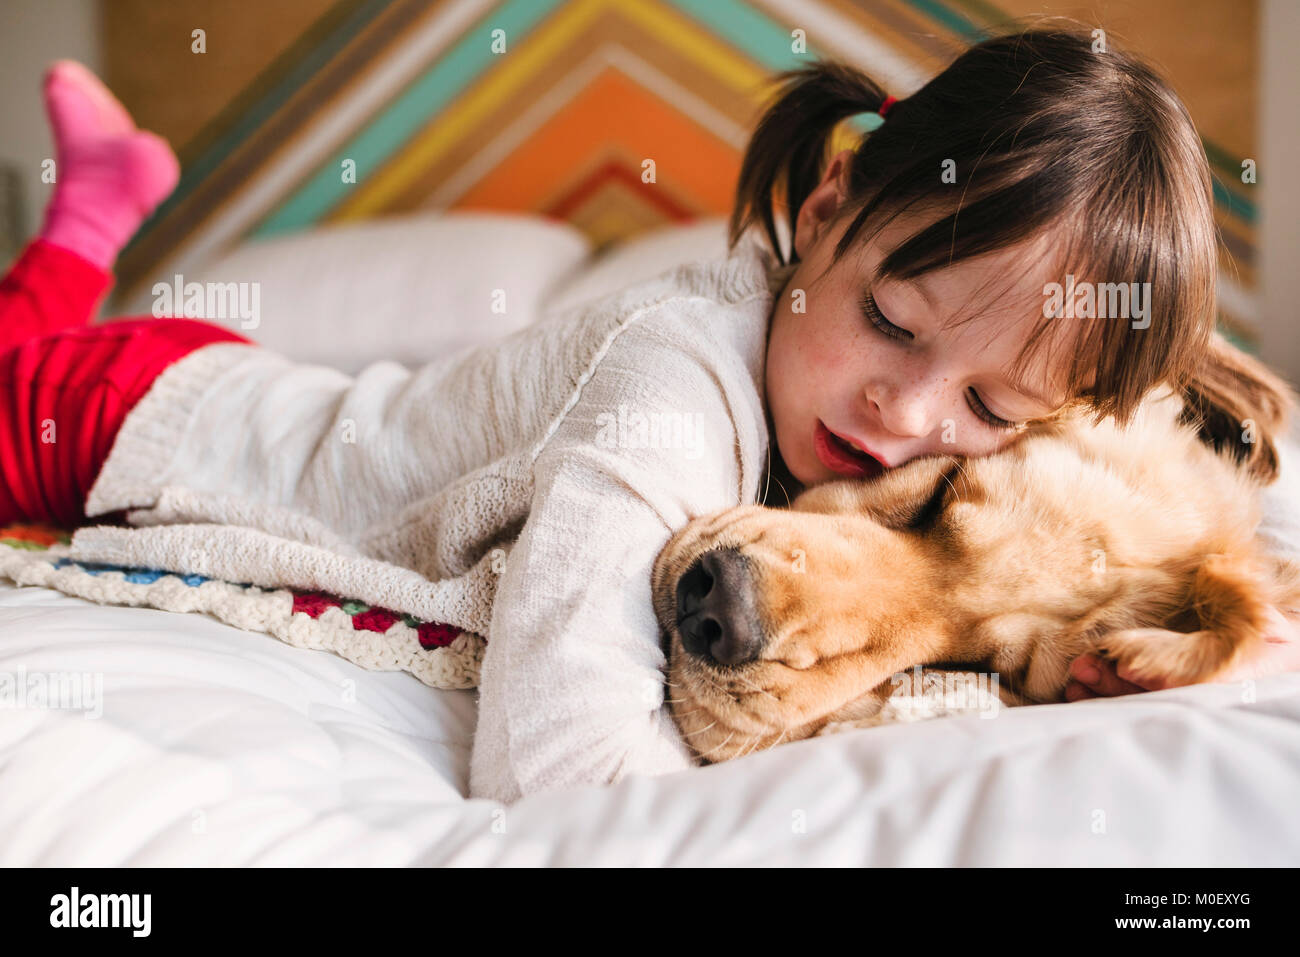 Girl lying on a bed with her golden retriever dog Stock Photo